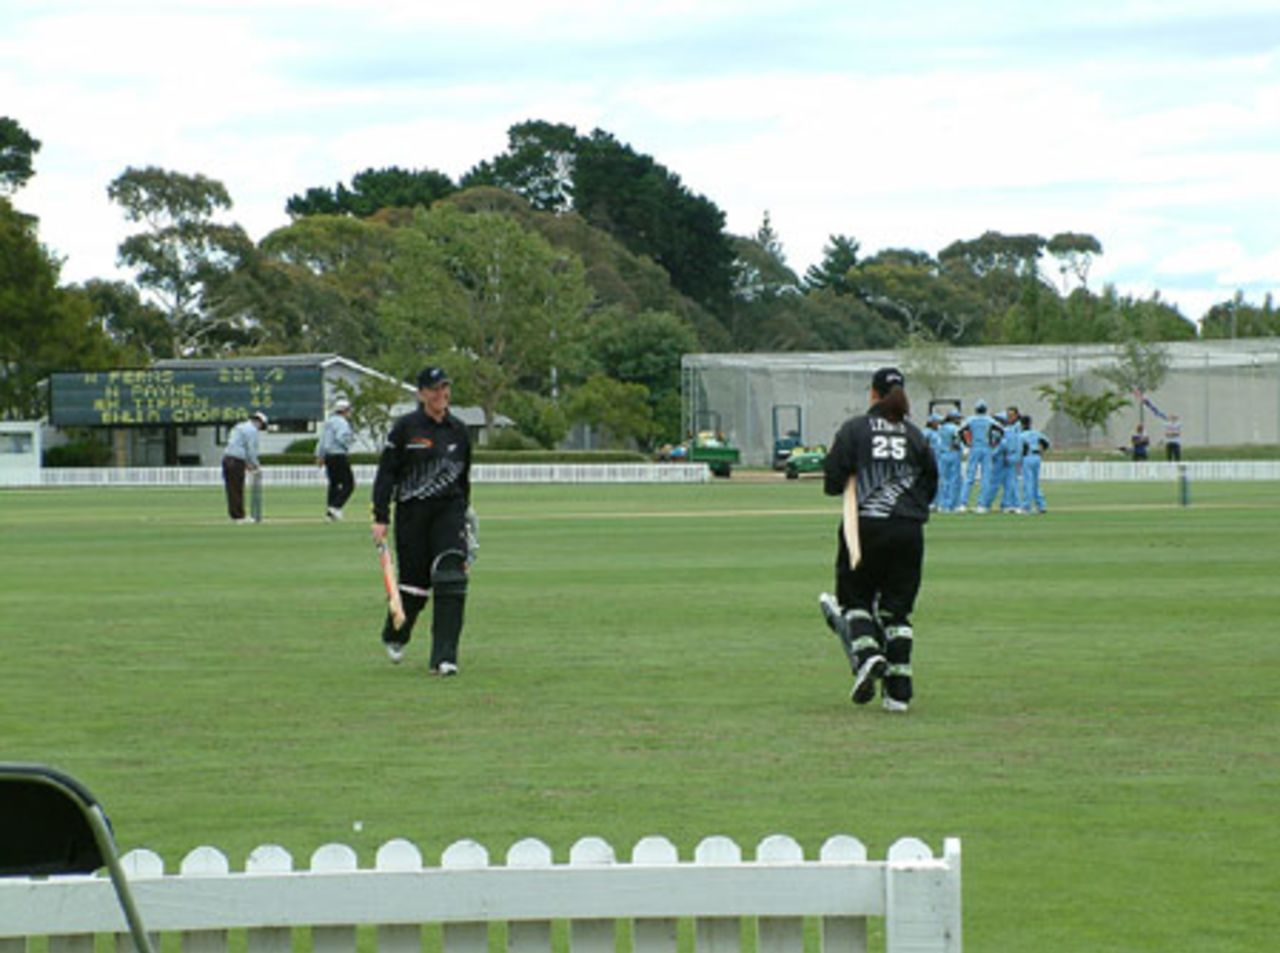 New Zealand Women batsman Nicola Payne (left) walks from the field after being dismissed for 93. Maia Lewis is the new batsman walking to the crease. World Series of Women's Cricket: India Women v New Zealand Women at Bert Sutcliffe Oval, Lincoln, 28 January 2003.